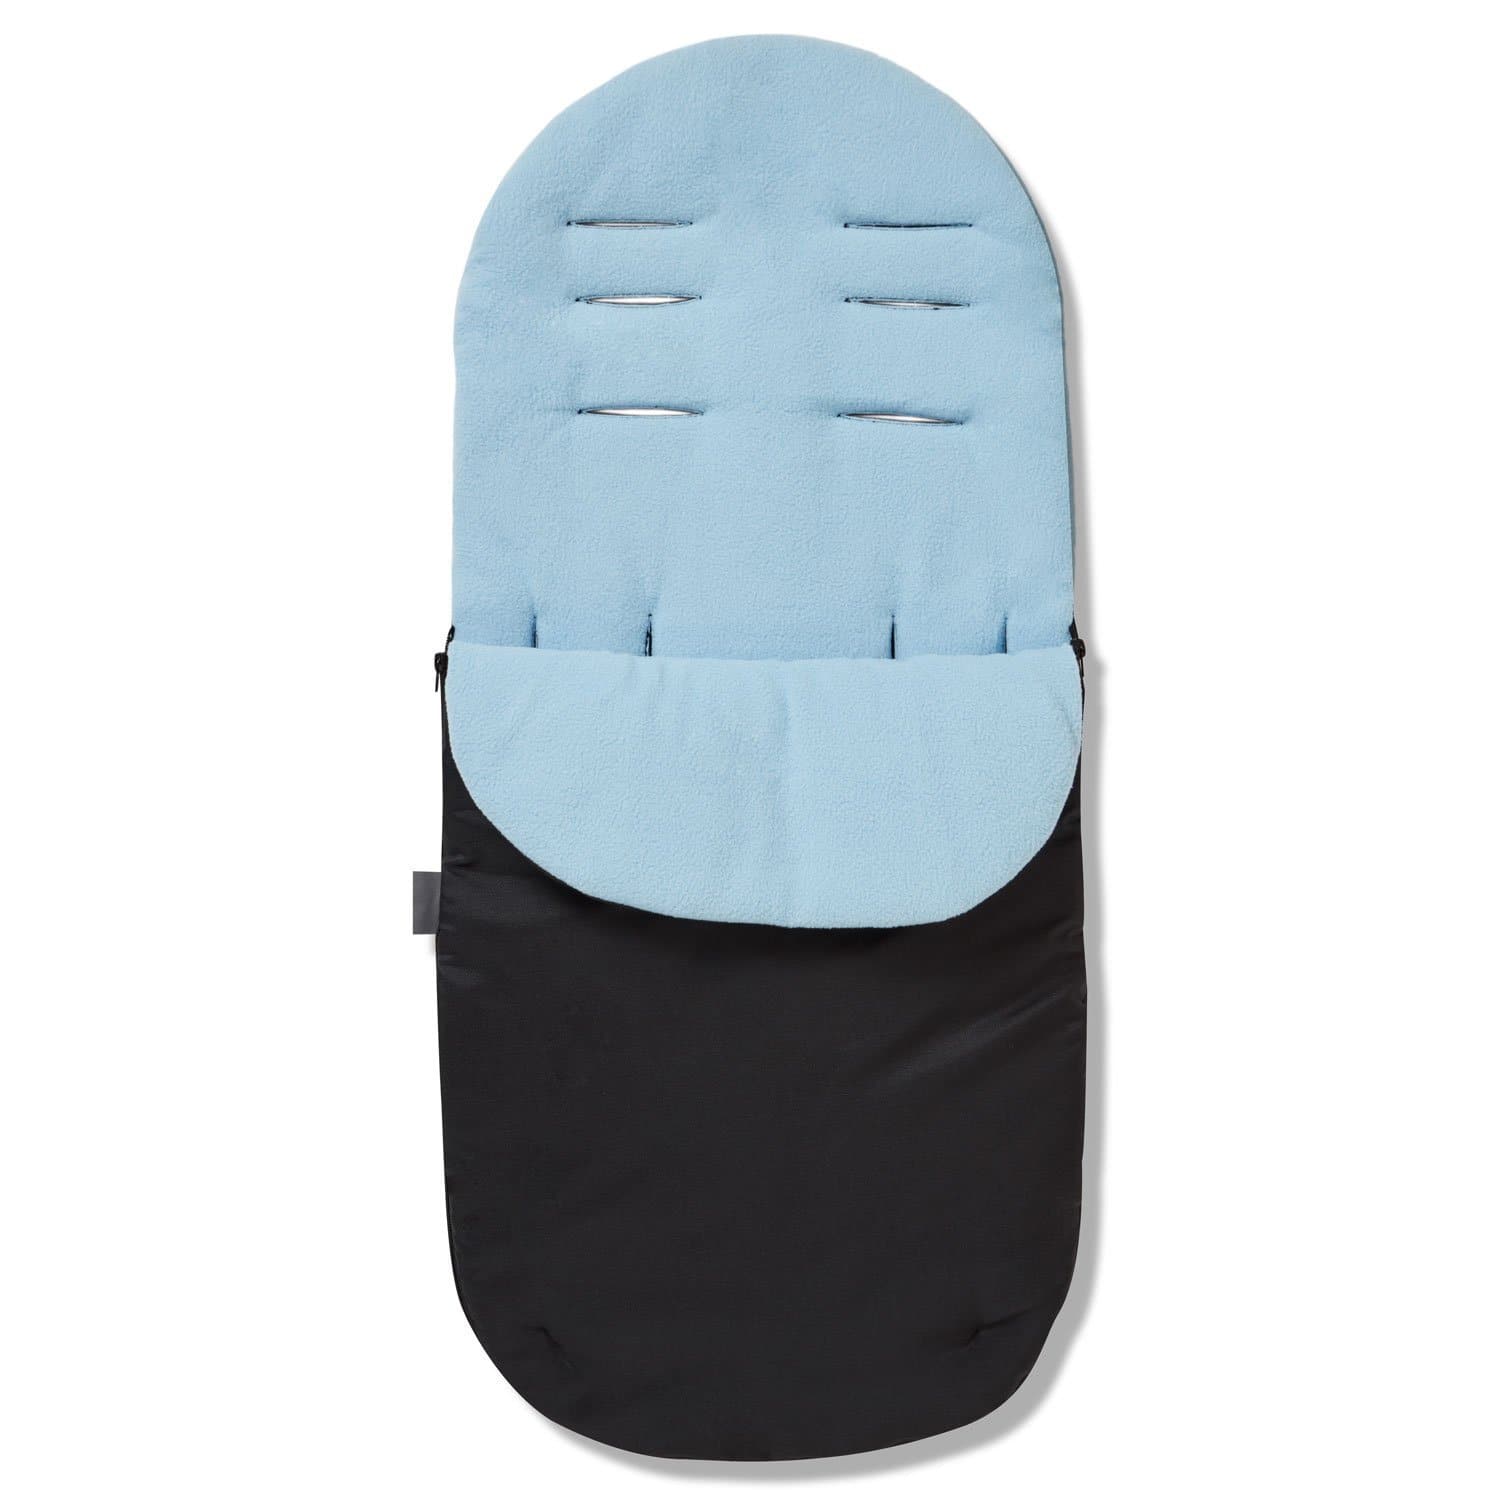 Footmuff / Cosy Toes Compatible with Urban Detour - For Your Little One